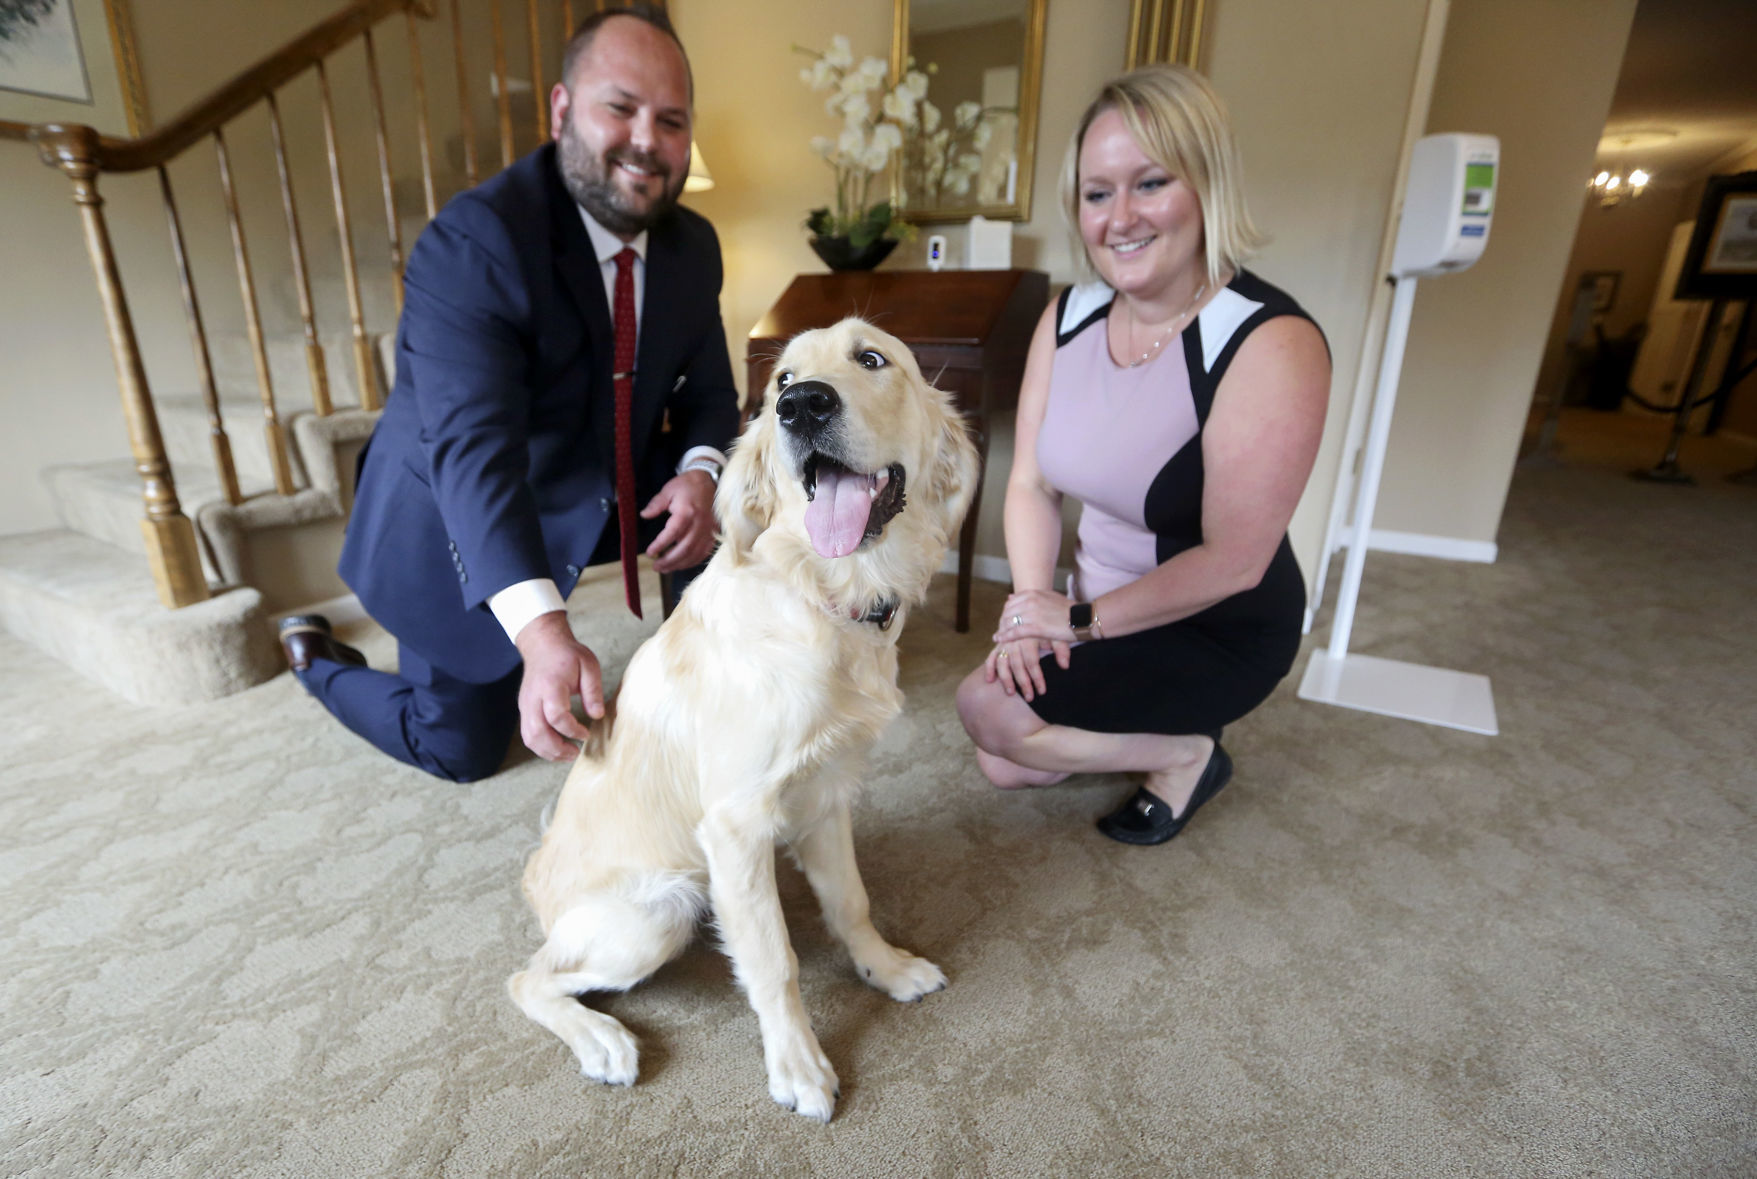 Managing Funeral Director Scott Glover and Office Manager Samantha Glover play with their dog, Stanley, at Hoffmann Schneider & Kitchen Funeral Home and Cremation Service in Dubuque, on Friday, June 19, 2020. Stanley is an English golden retriever and comes to the business to provide stress relief for employees and customers. PHOTO CREDIT: NICKI KOHL